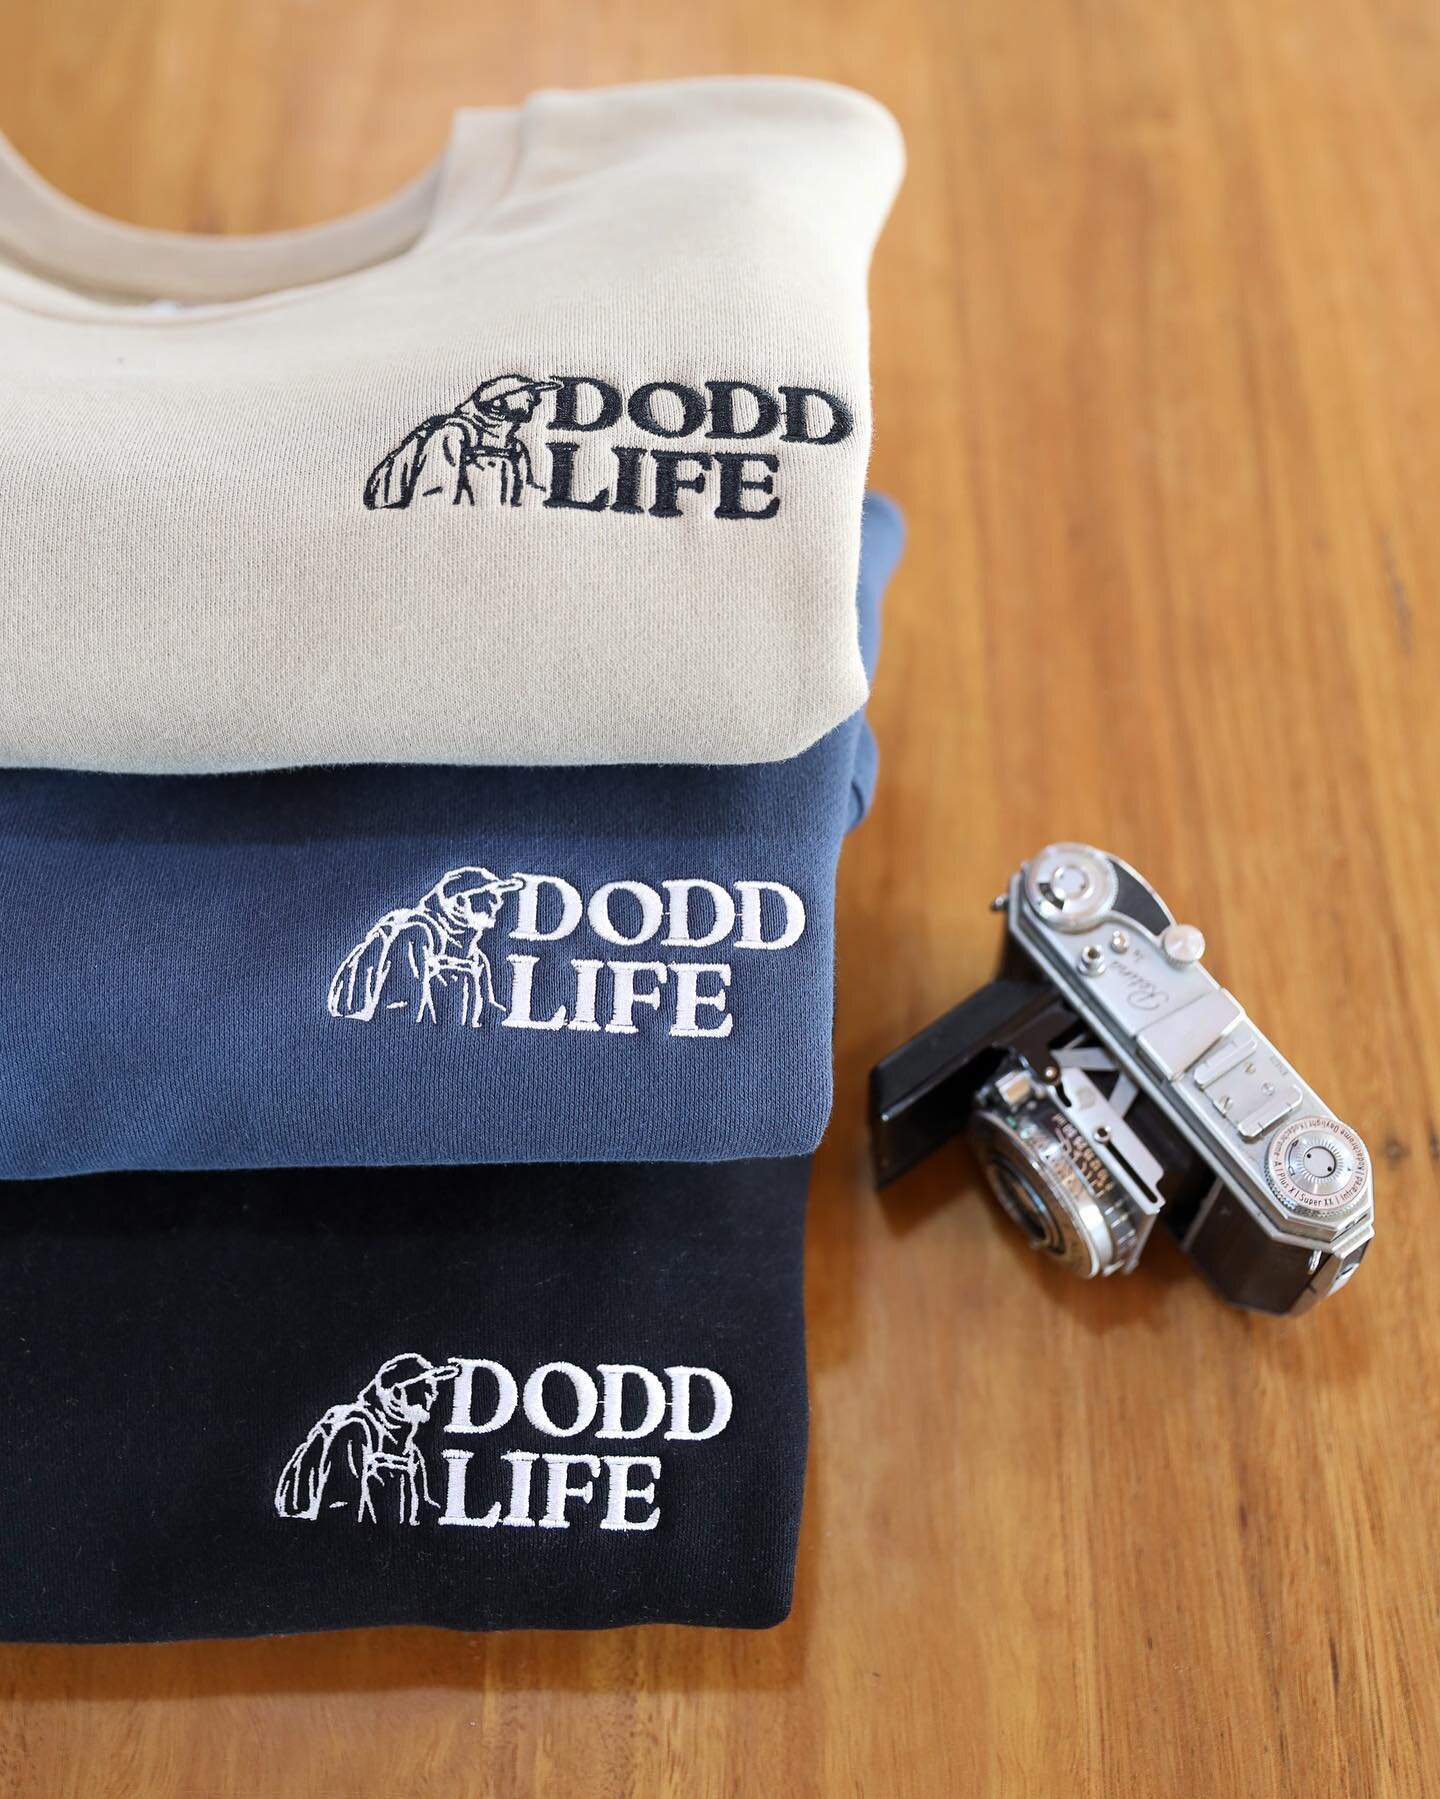 Doddlife jumpers are stocked!! 

Their fleecy goodness is perfect for those cooler nights sitting around the campfire or days spent walking the coast. 

Available in three colours and ready for immediate shipping. 

Link in bio. 
.
.
.
.
#doddlife #c